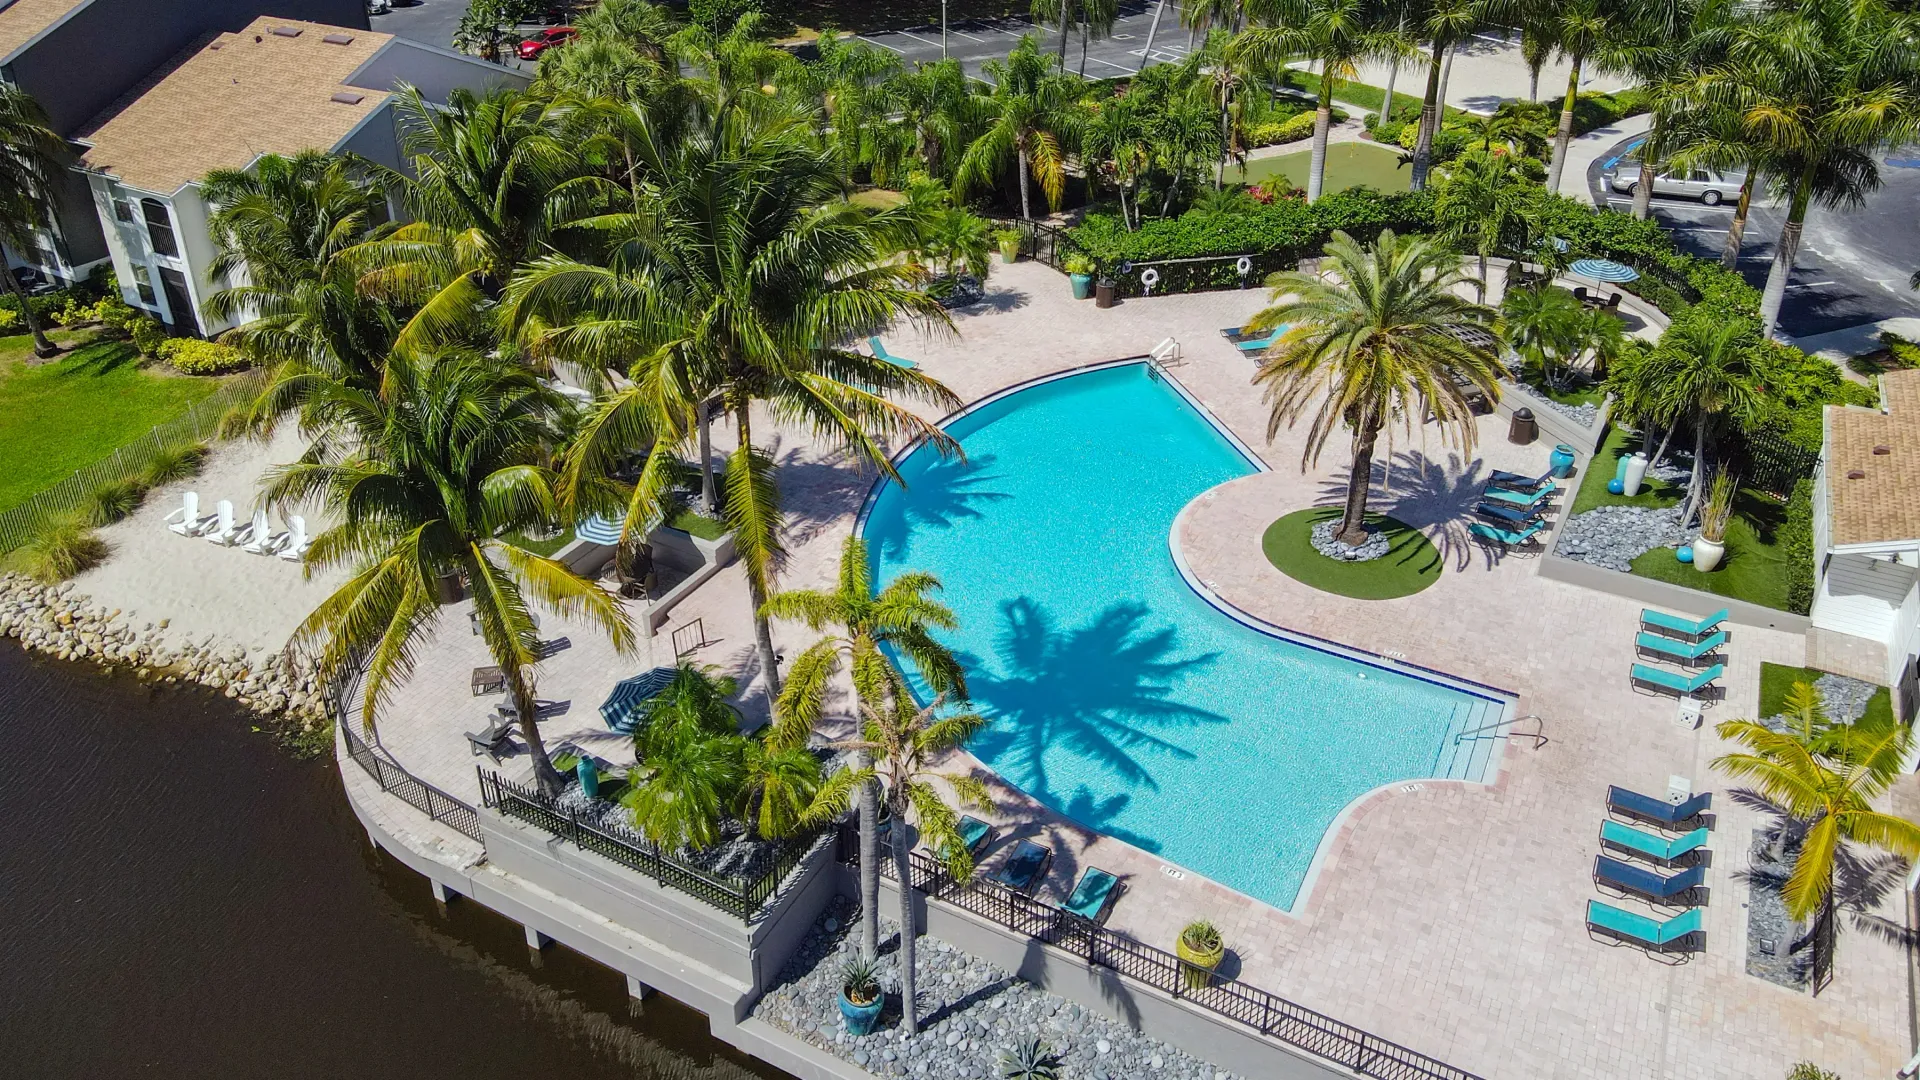 A picturesque aerial view highlighting the vast pool deck, vibrant palm trees, and tranquil lakefront vistas, creating an inviting setting for pure waterside relaxation amidst breathtaking natural beauty.